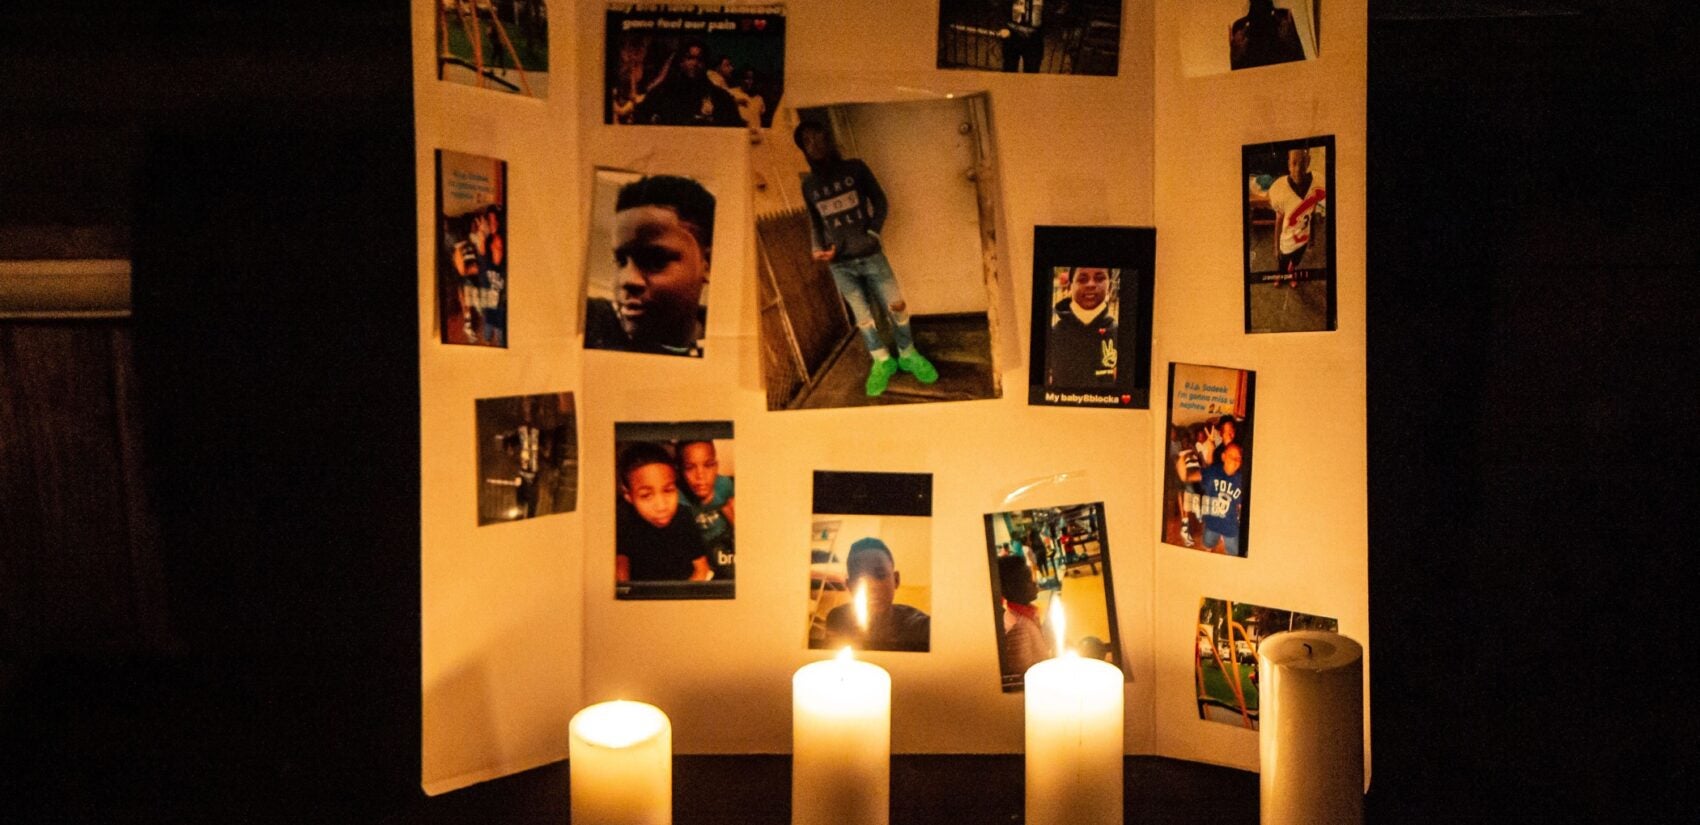 Photos of 12-year-old Sadeek Clark-Harrison and candles honor his life on his porch in Frankford. (Kimberly Paynter/WHYY)